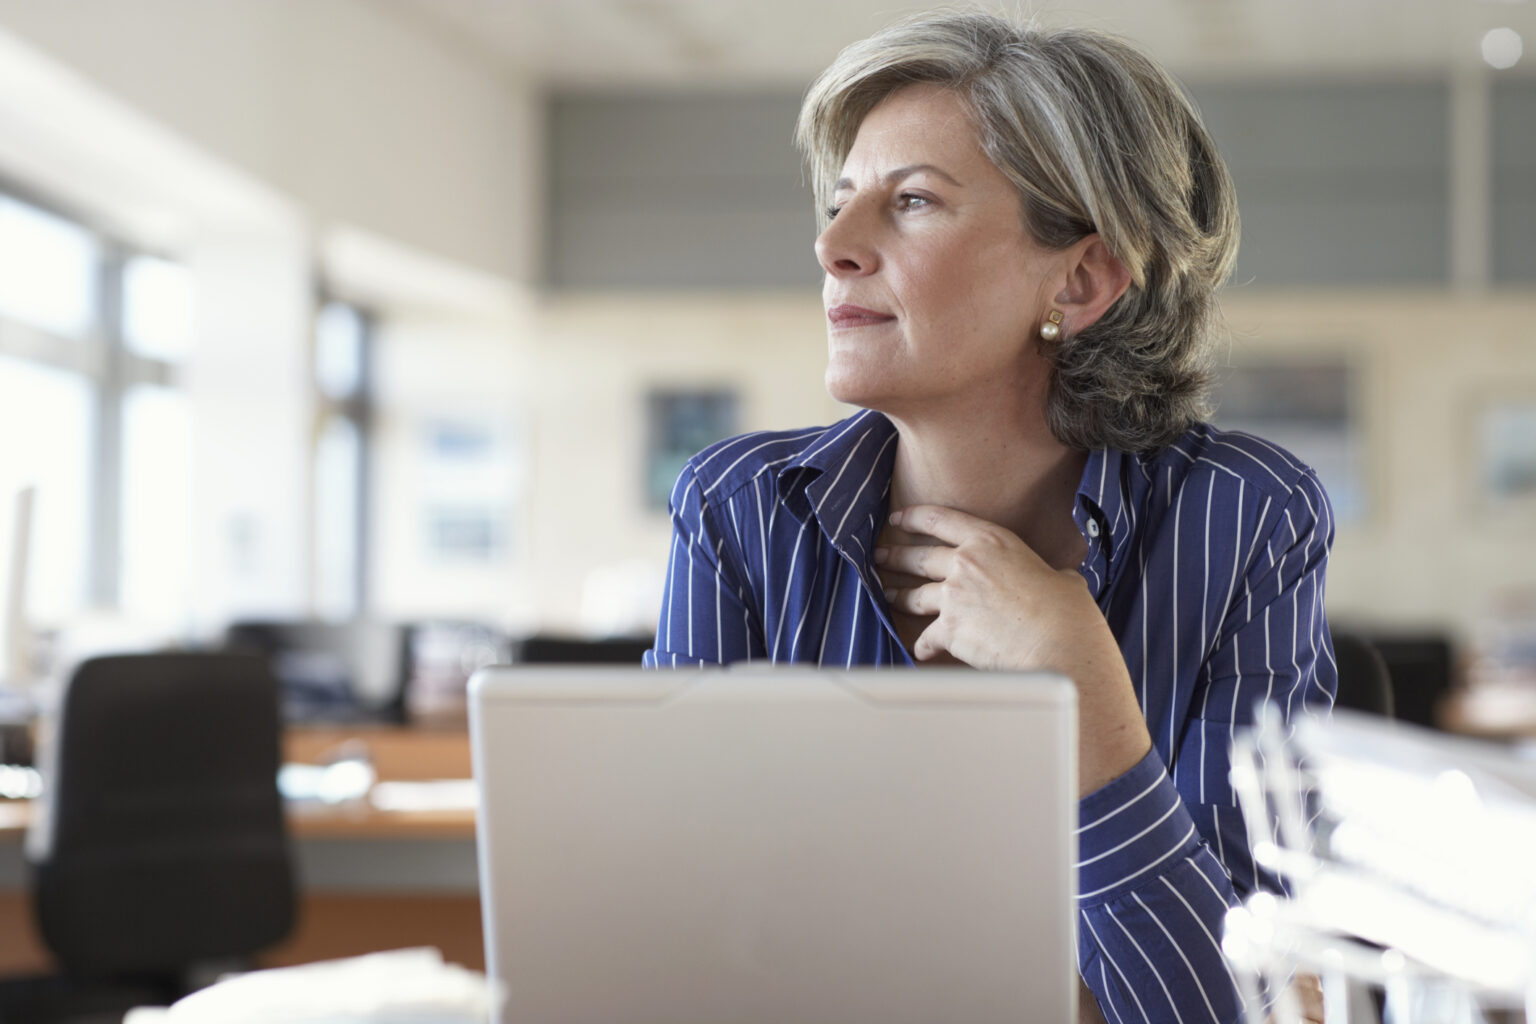 Mature Woman On Laptop Thinking And Looking Out Window.jpg